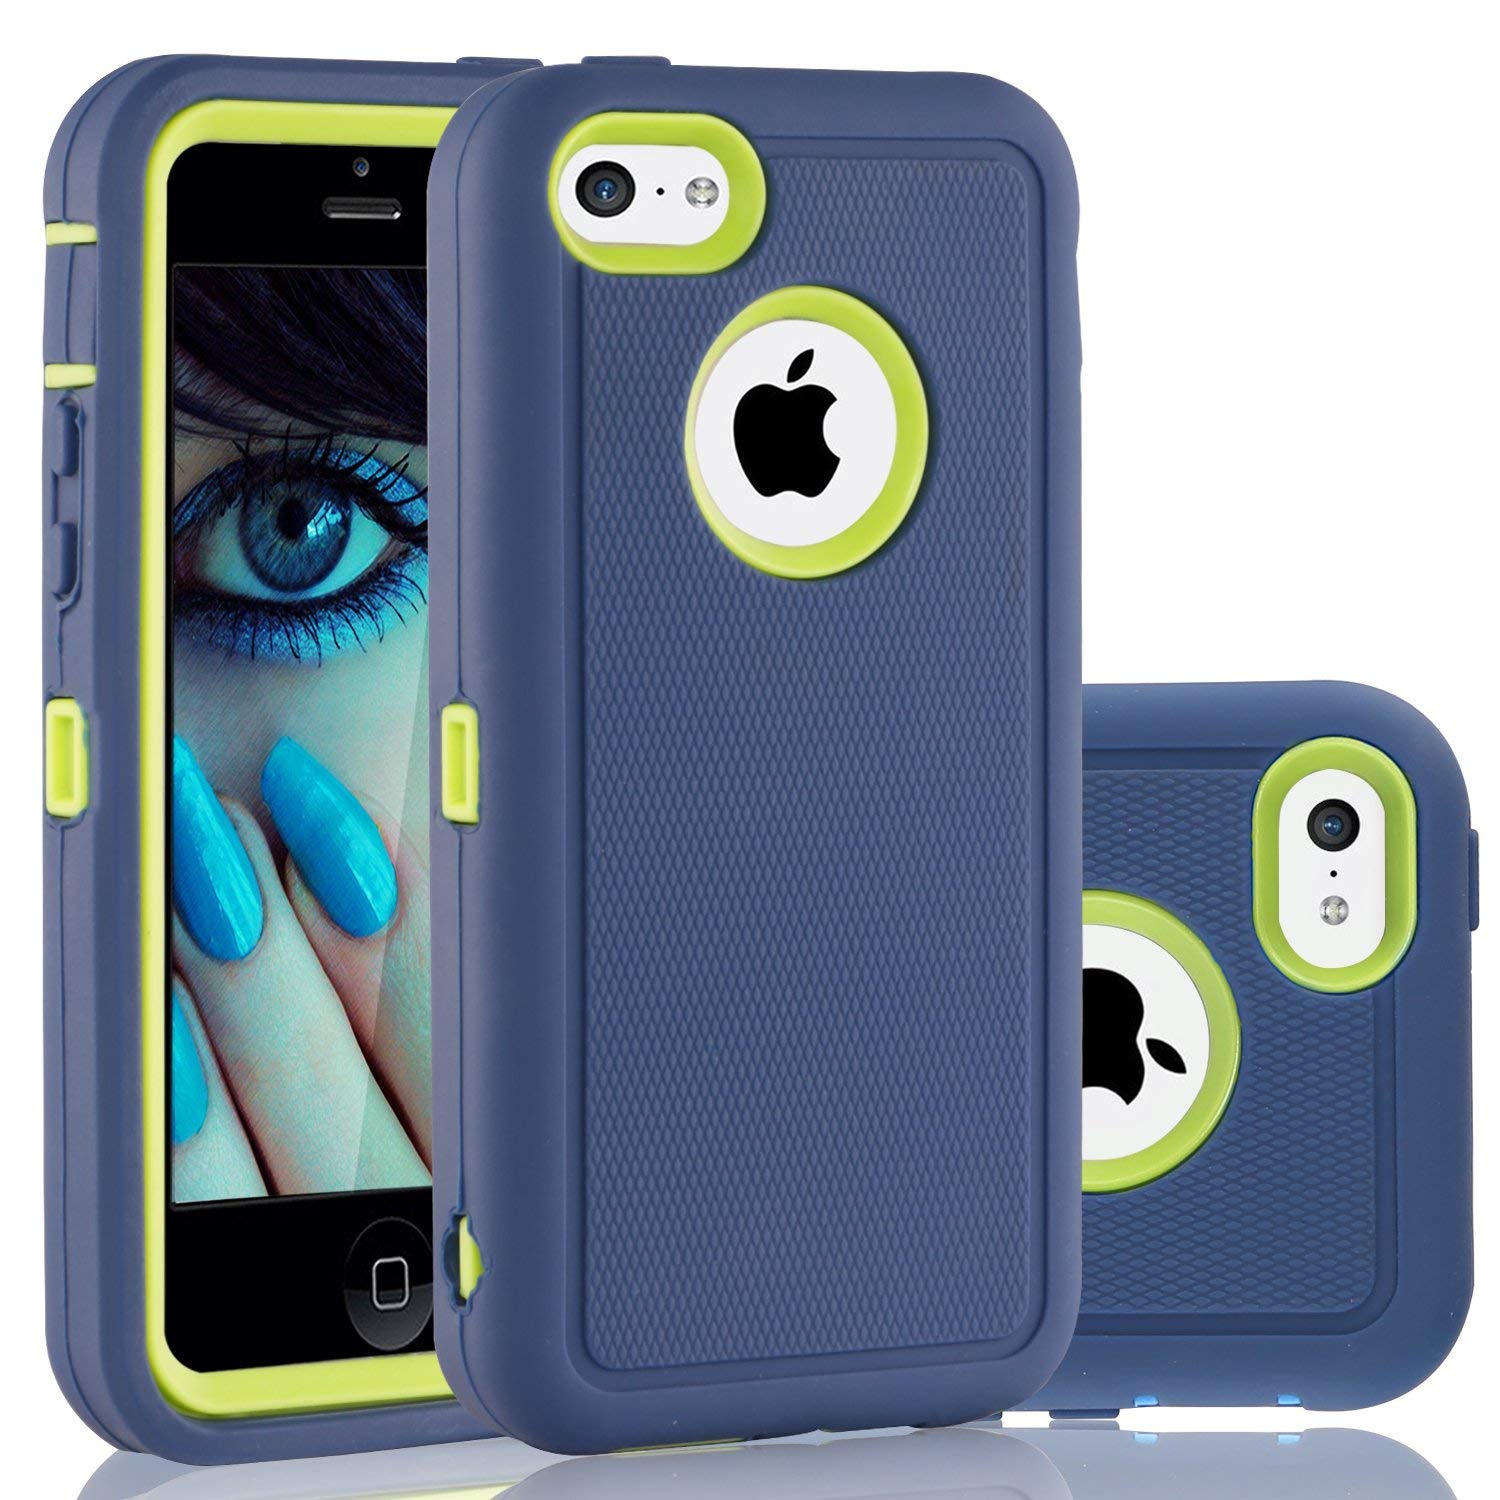 iPhone 5C Case, FOGEEK Dual layer Anti Slip 360 Full Body Cover Case PC and TPU Shockproof Protective Compatible for Apple iPhone 5C ONLY(Blue/Green)